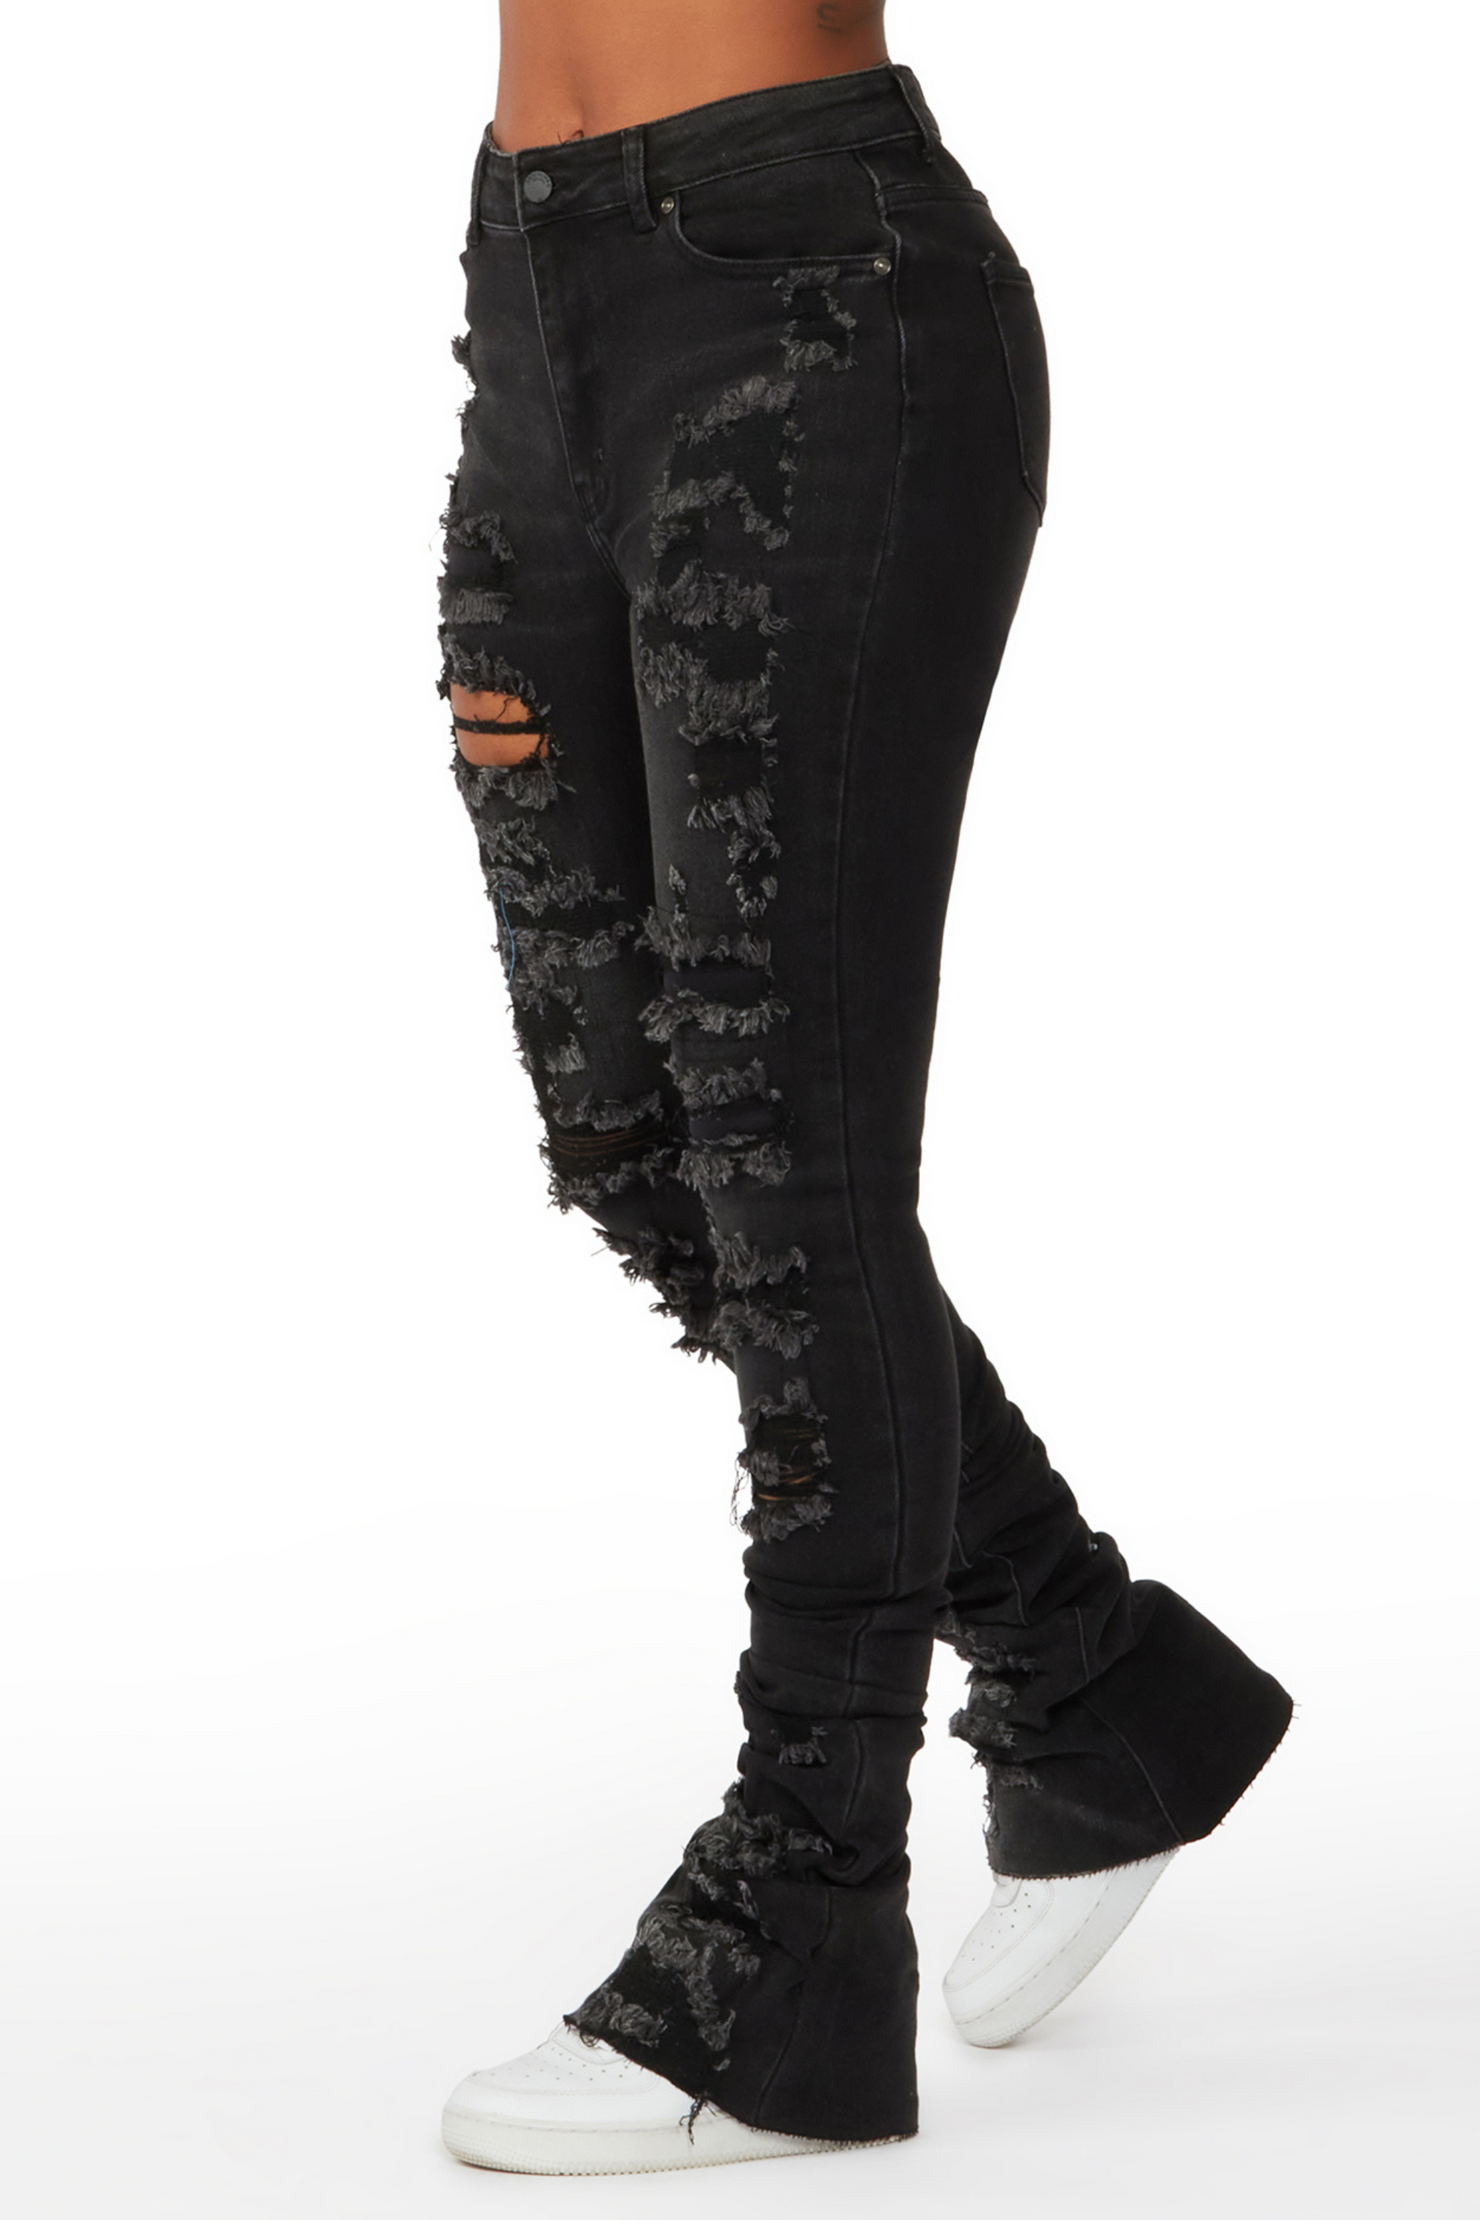 Your Loss Black Distressed Super Stacked Jean